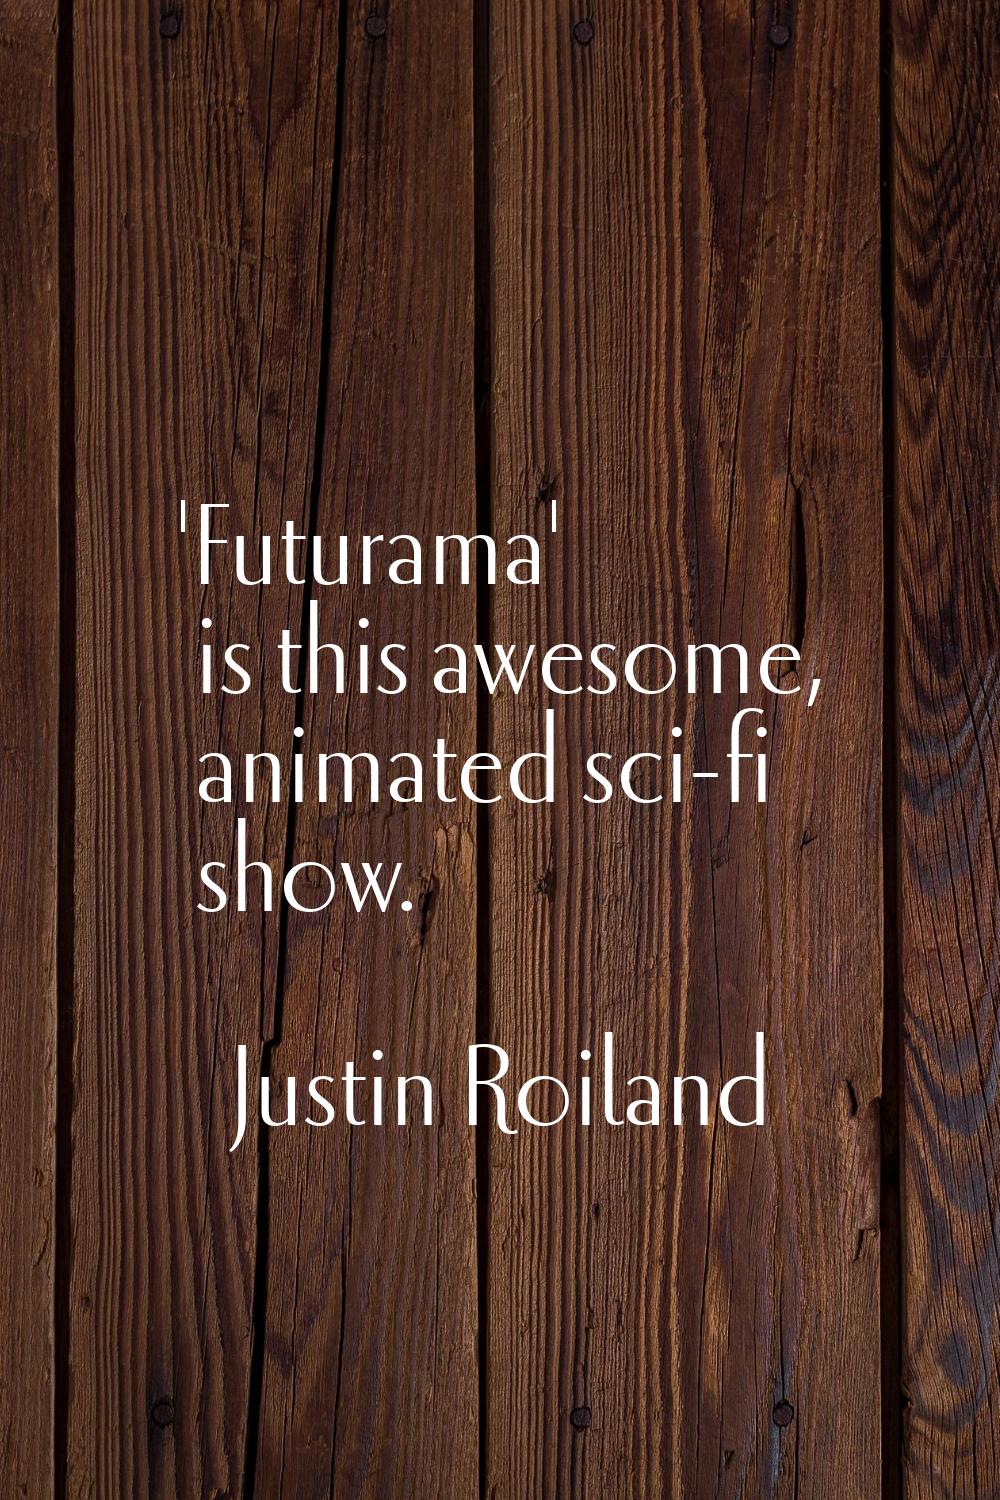 'Futurama' is this awesome, animated sci-fi show.